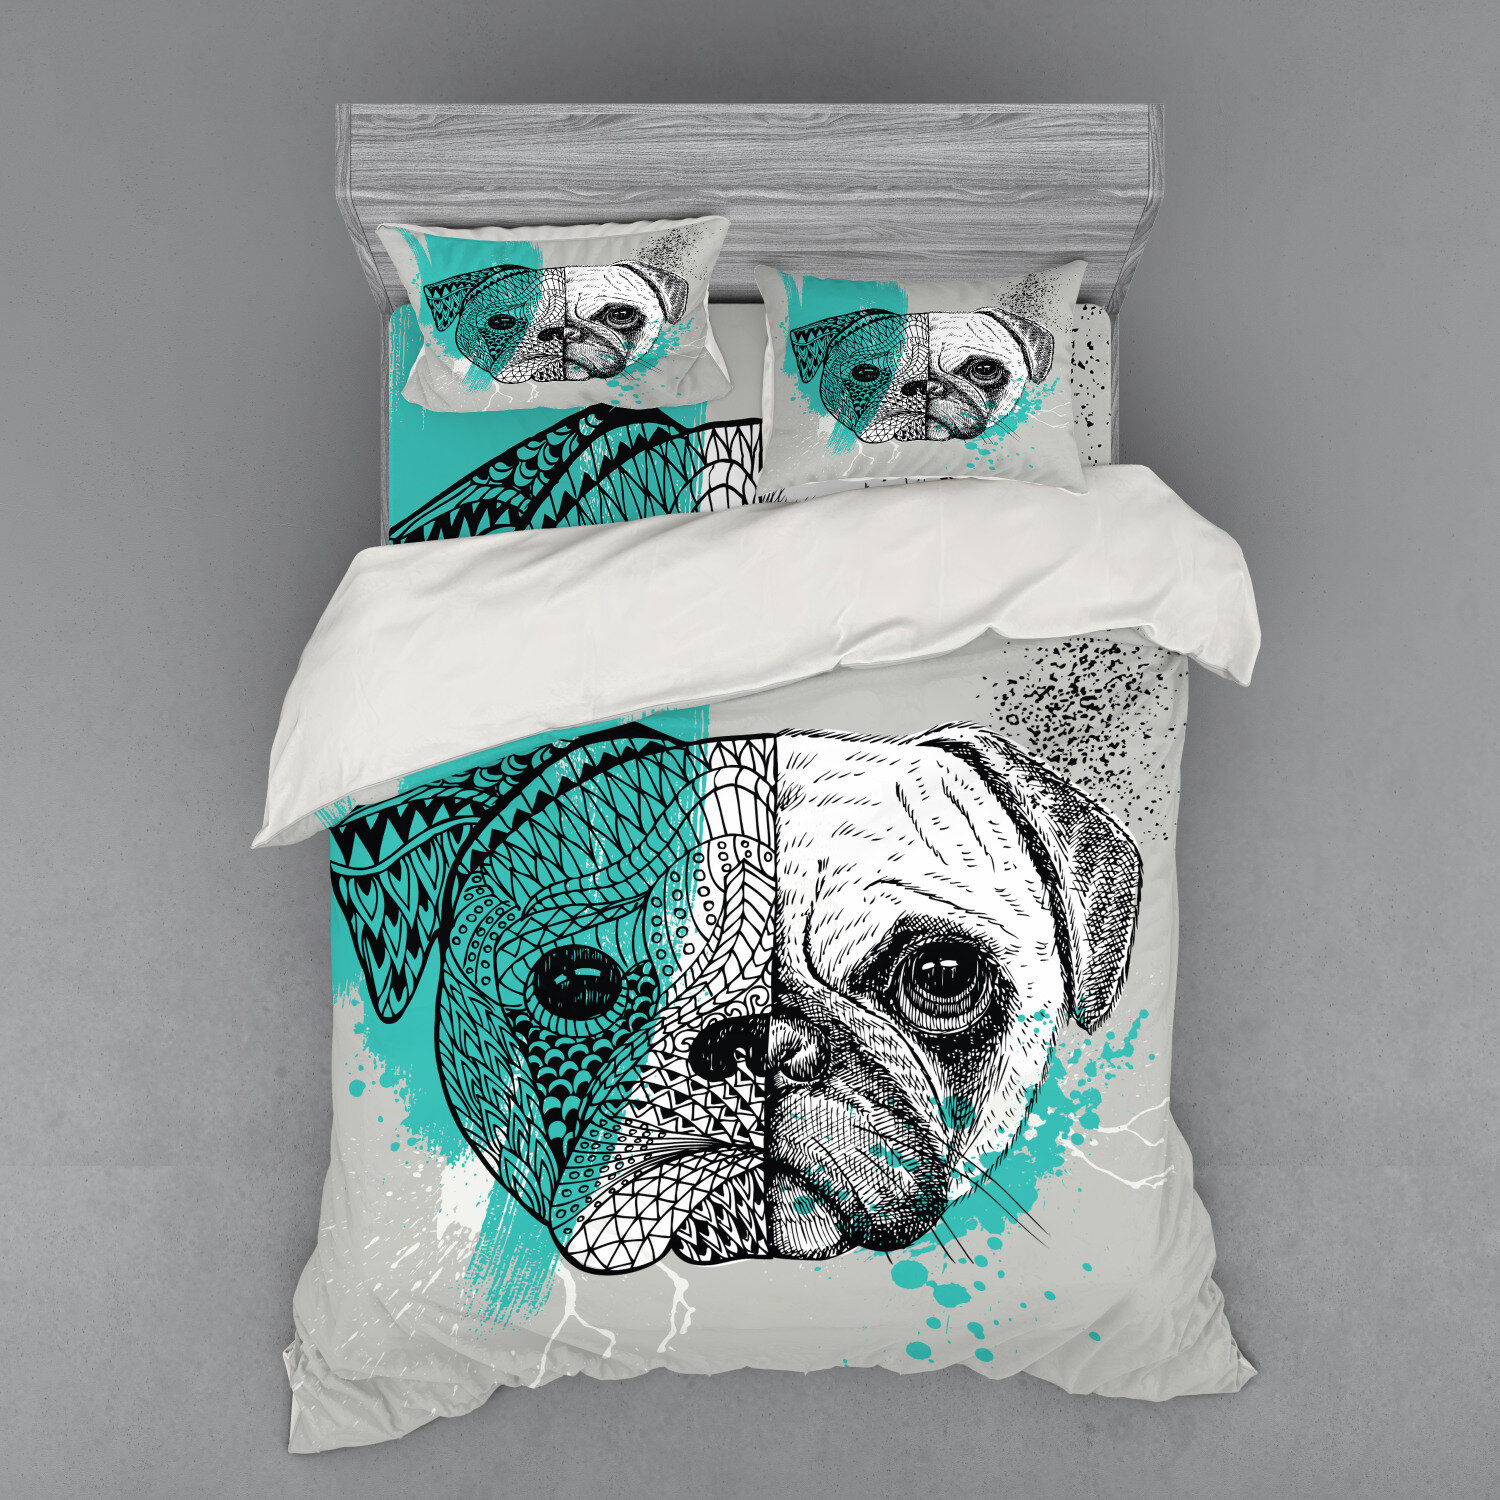 Pug Dogs Designs Lampshades Ideal To Match Pug Dogs Duvets & Pug Dogs Pillows. 